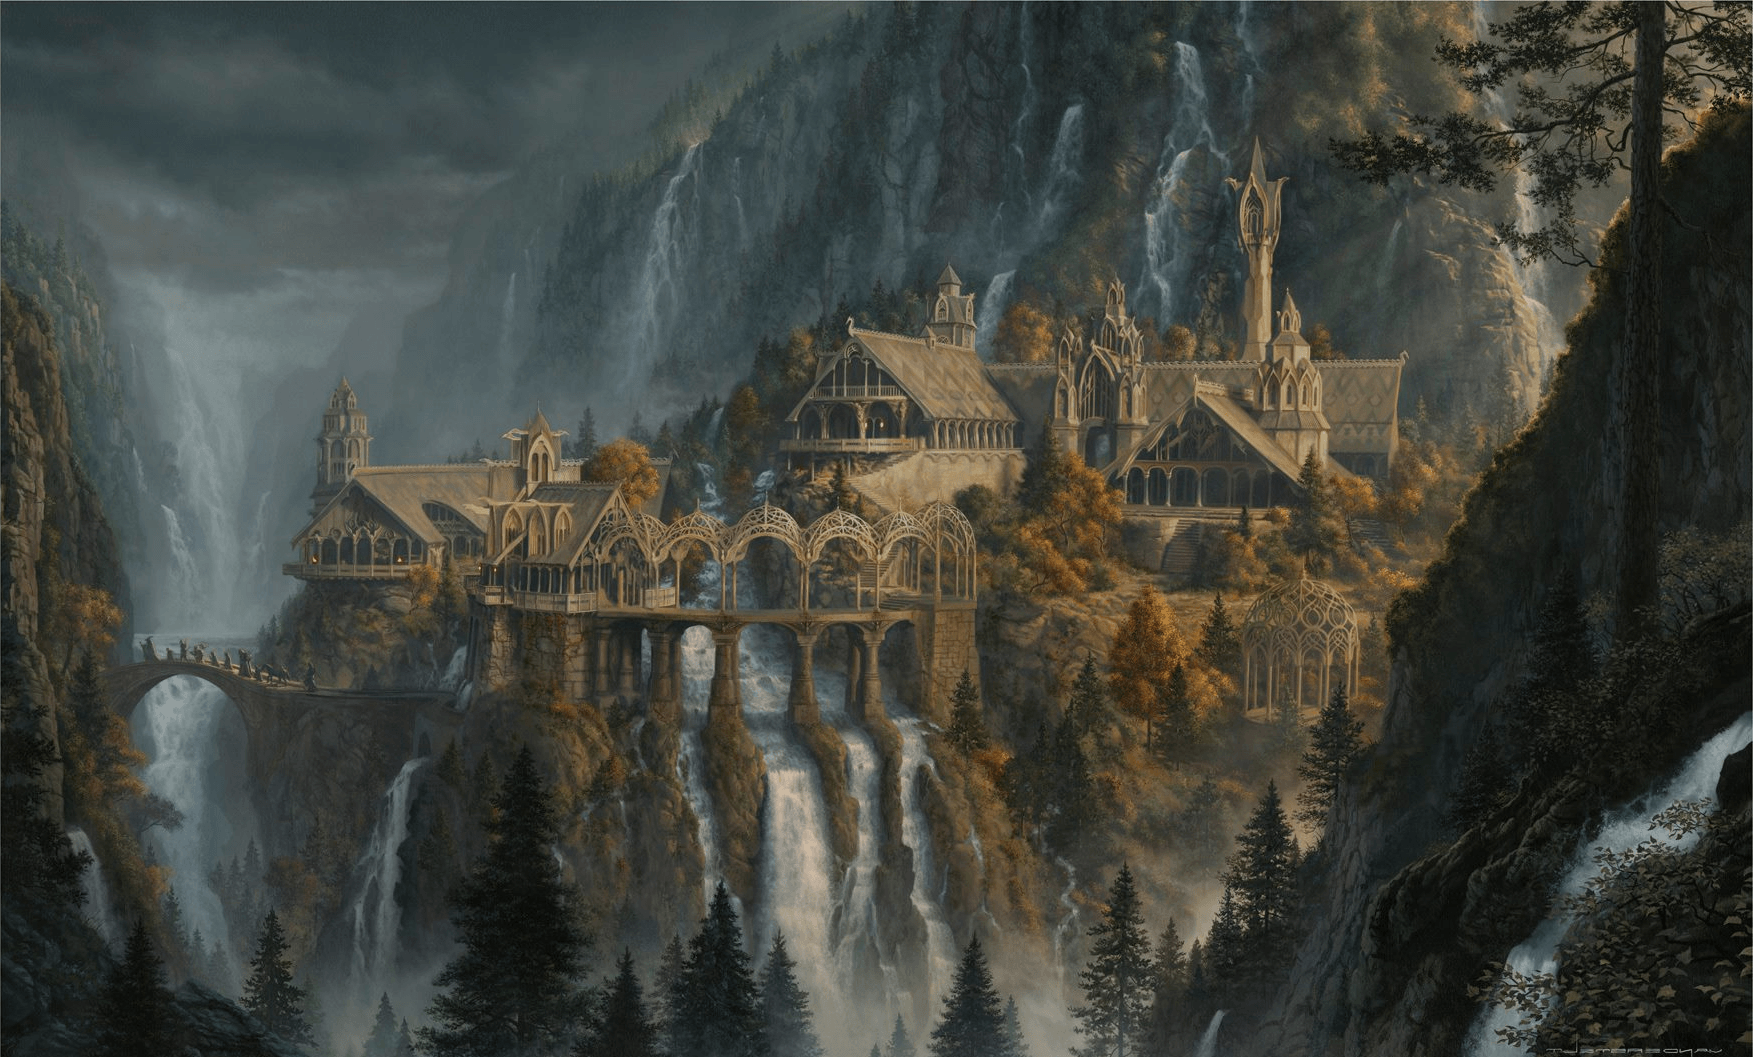 waterfall, J. R. R. Tolkien, The Lord Of The Rings, Artwork